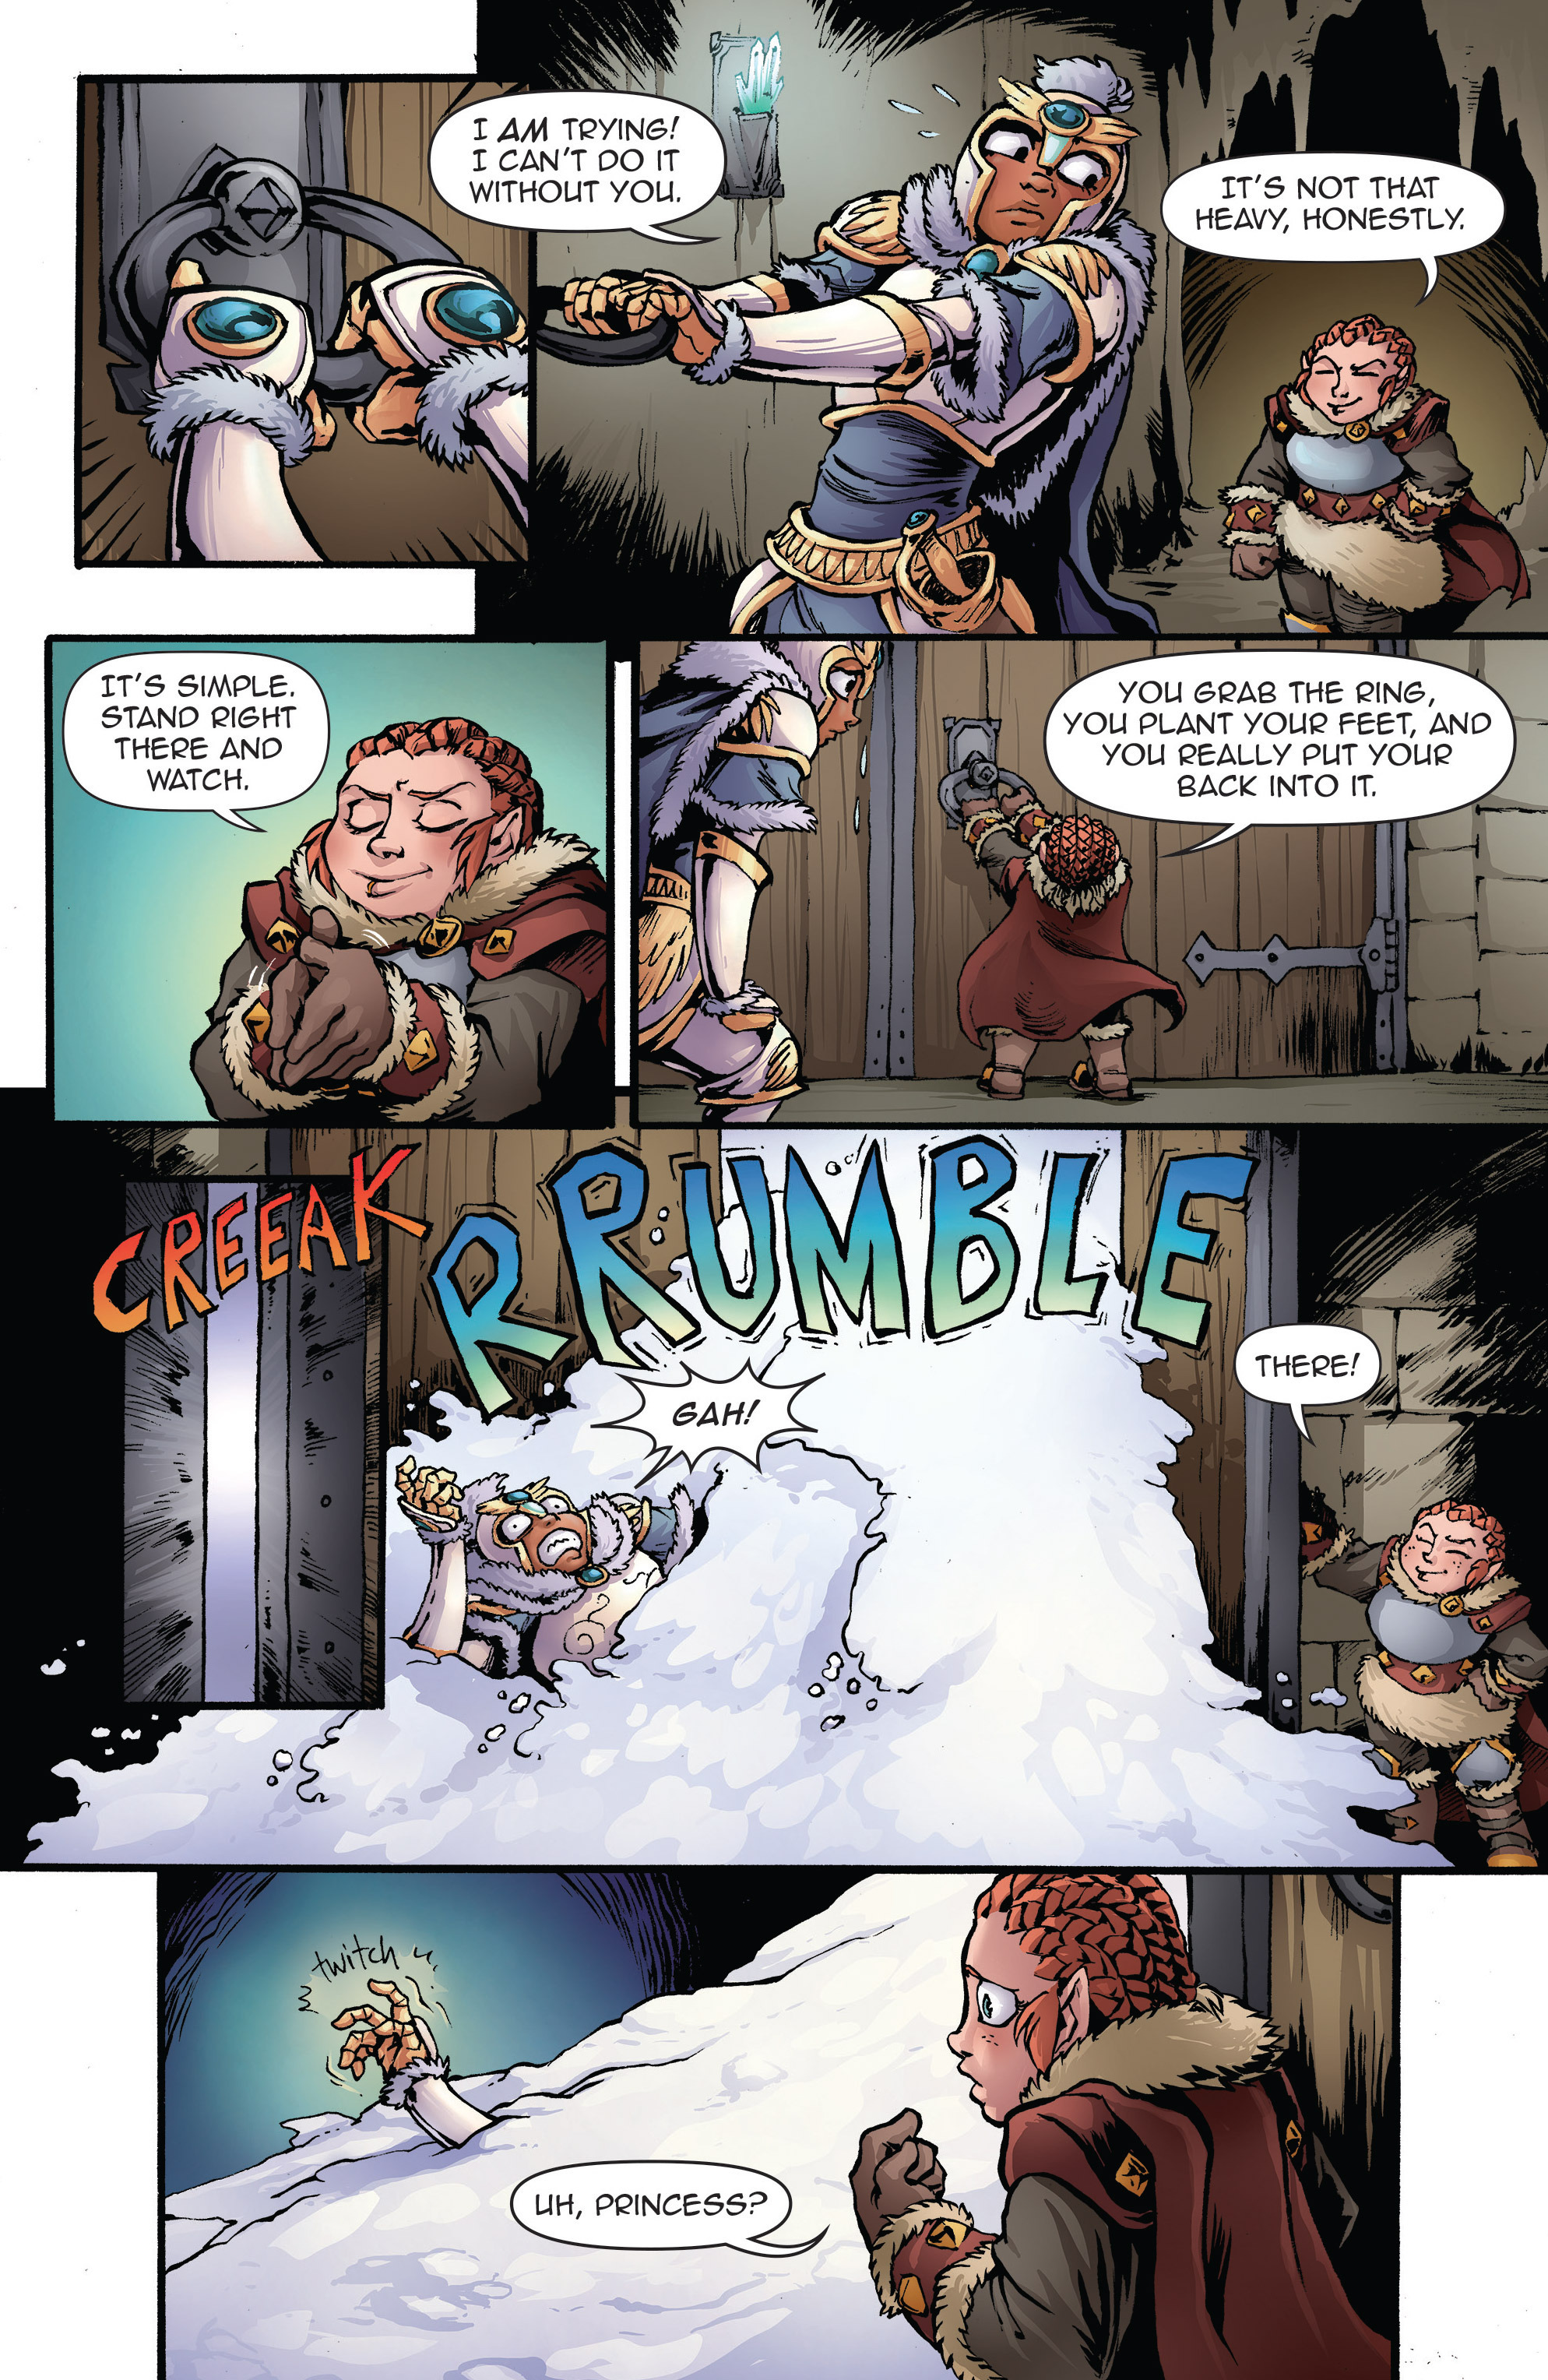 Read online Princeless: Make Yourself comic -  Issue #3 - 7